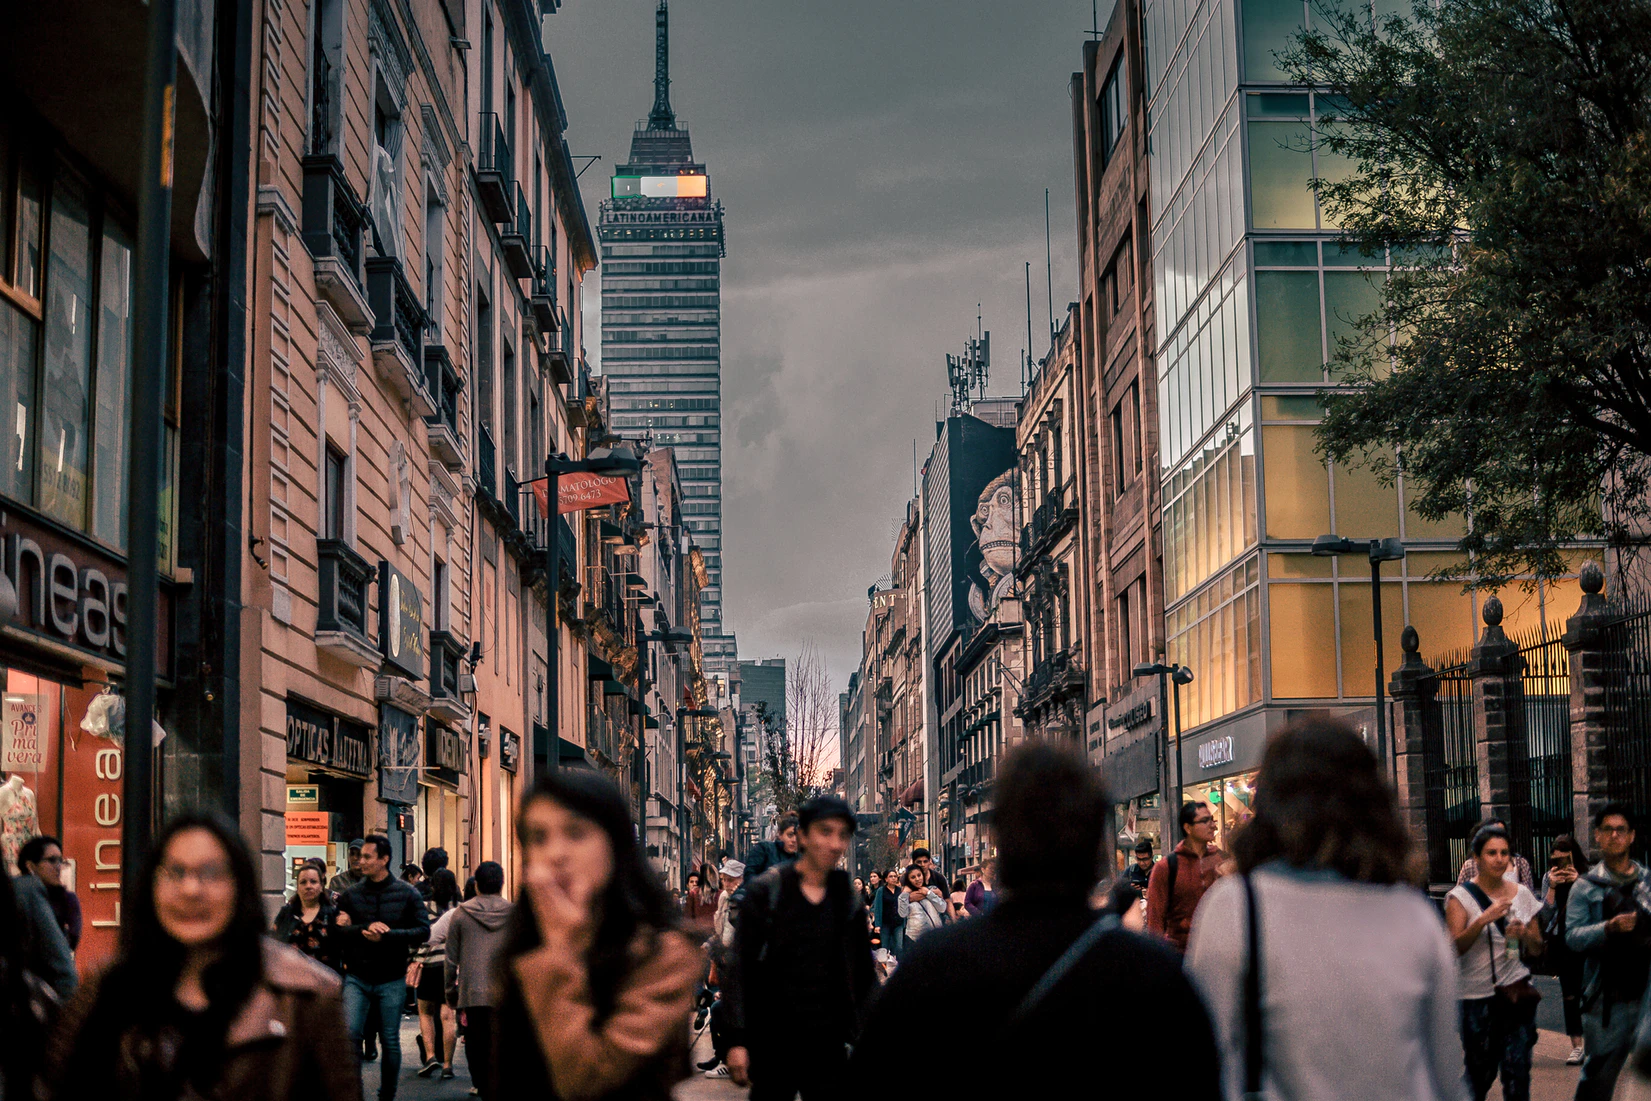 Crowded streets of Mexico City, Mexico with grey skies